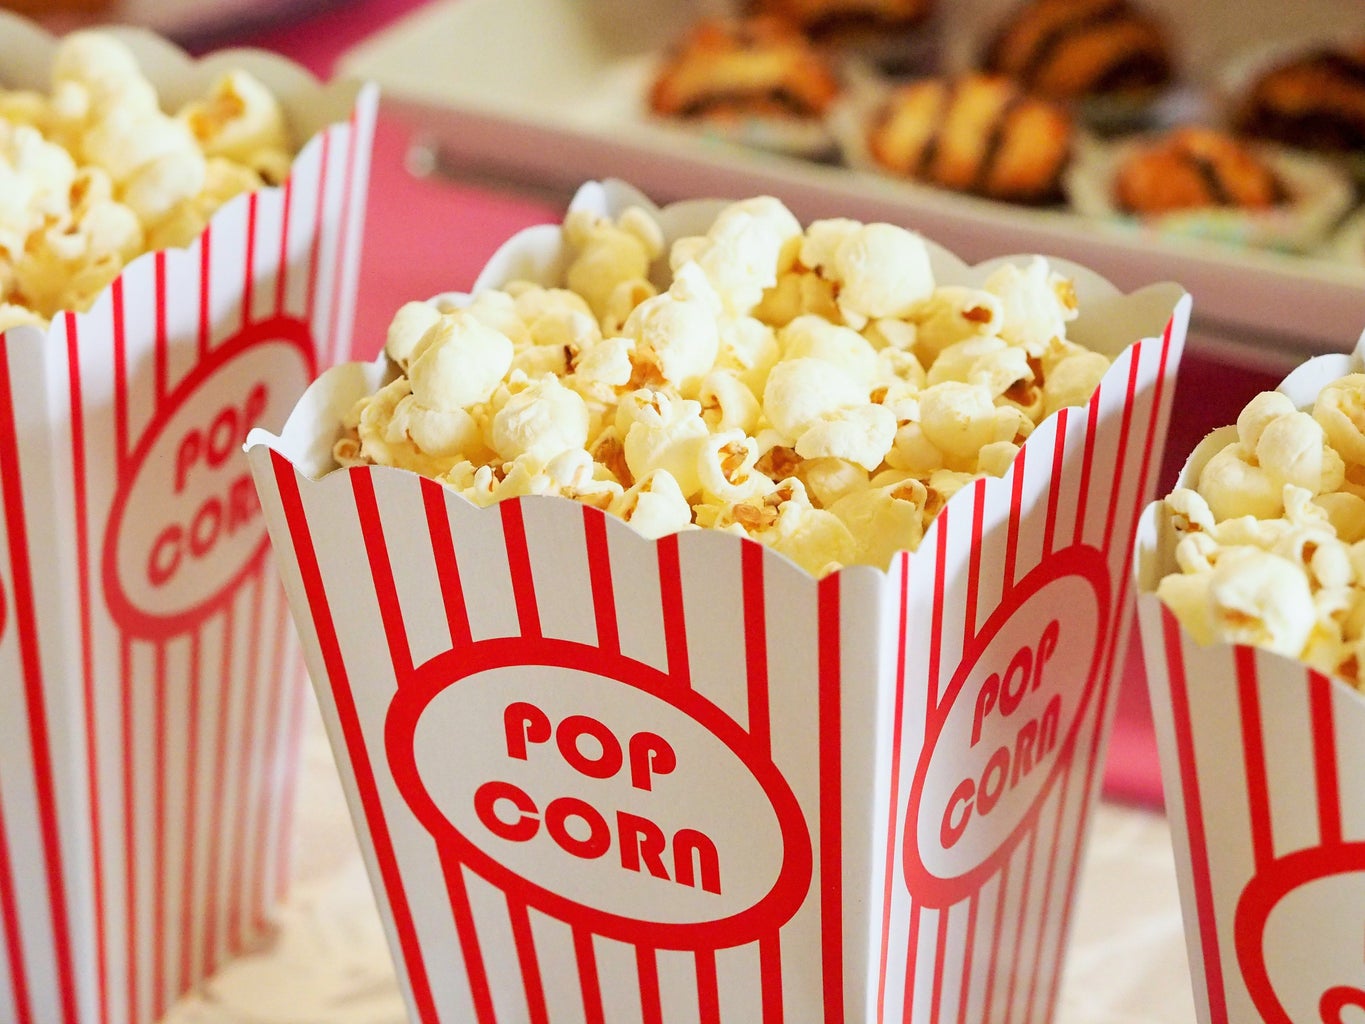 food snack popcorn movie theater 33129?width=1024&height=1024&fit=cover&auto=webp